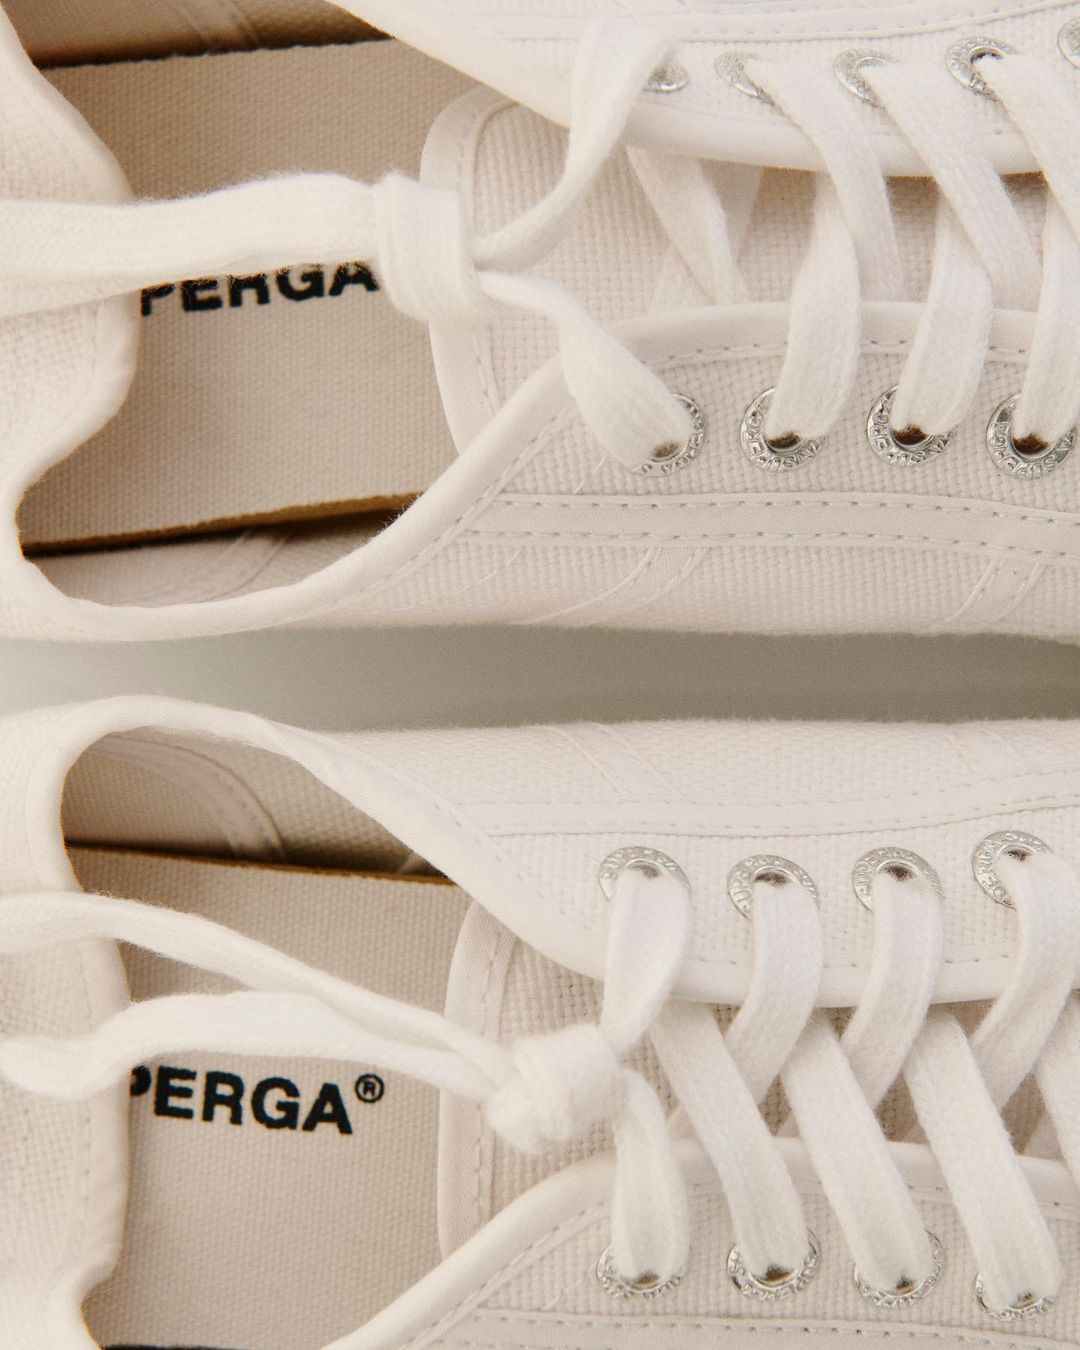 A close up image of White Superga 2750 Cotu Classic Sneakers.